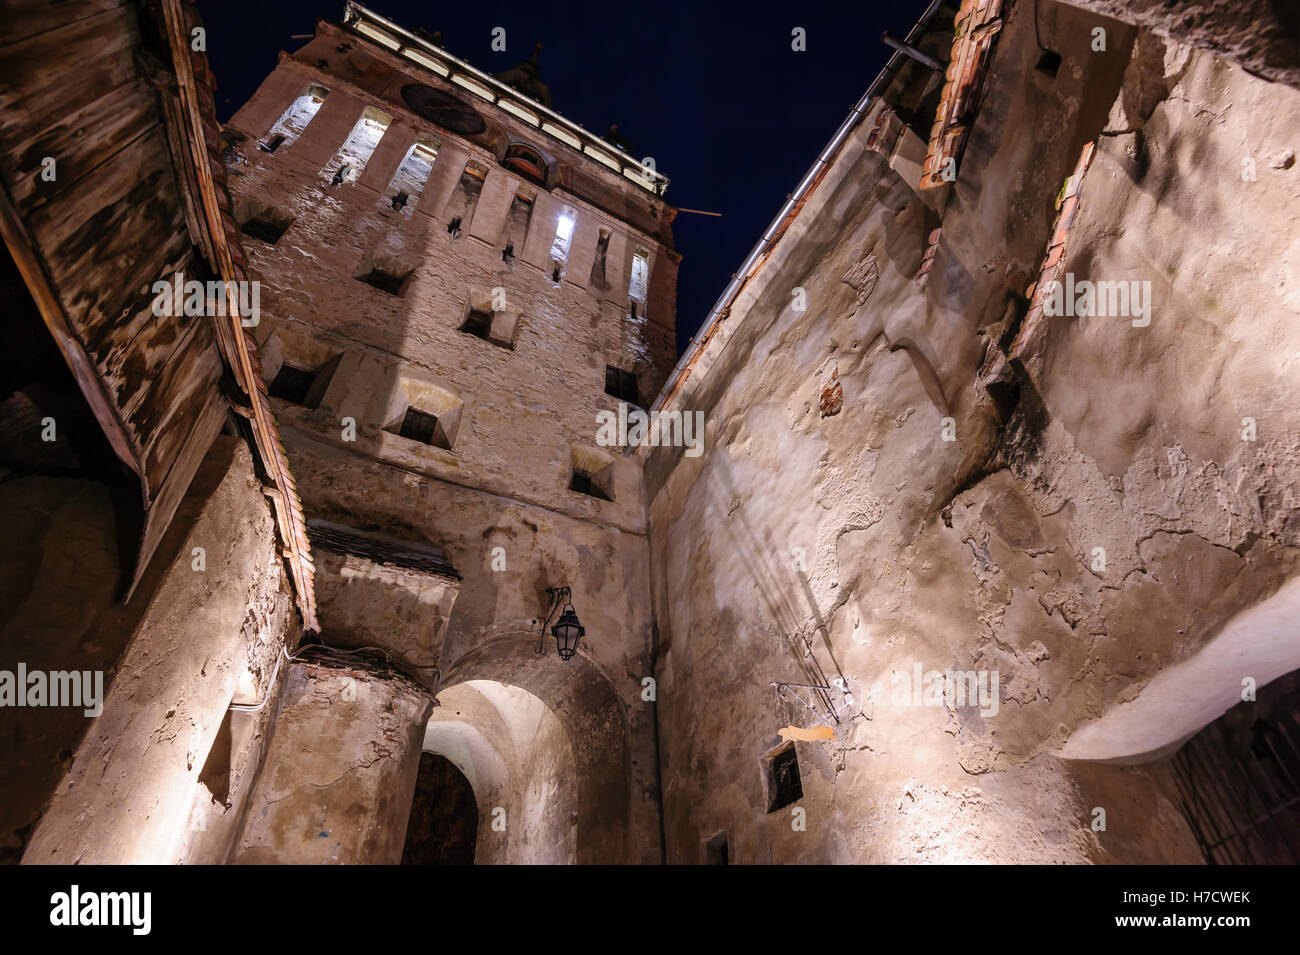 Watch tower in Sighisoara town, Romania, at night Stock Photo